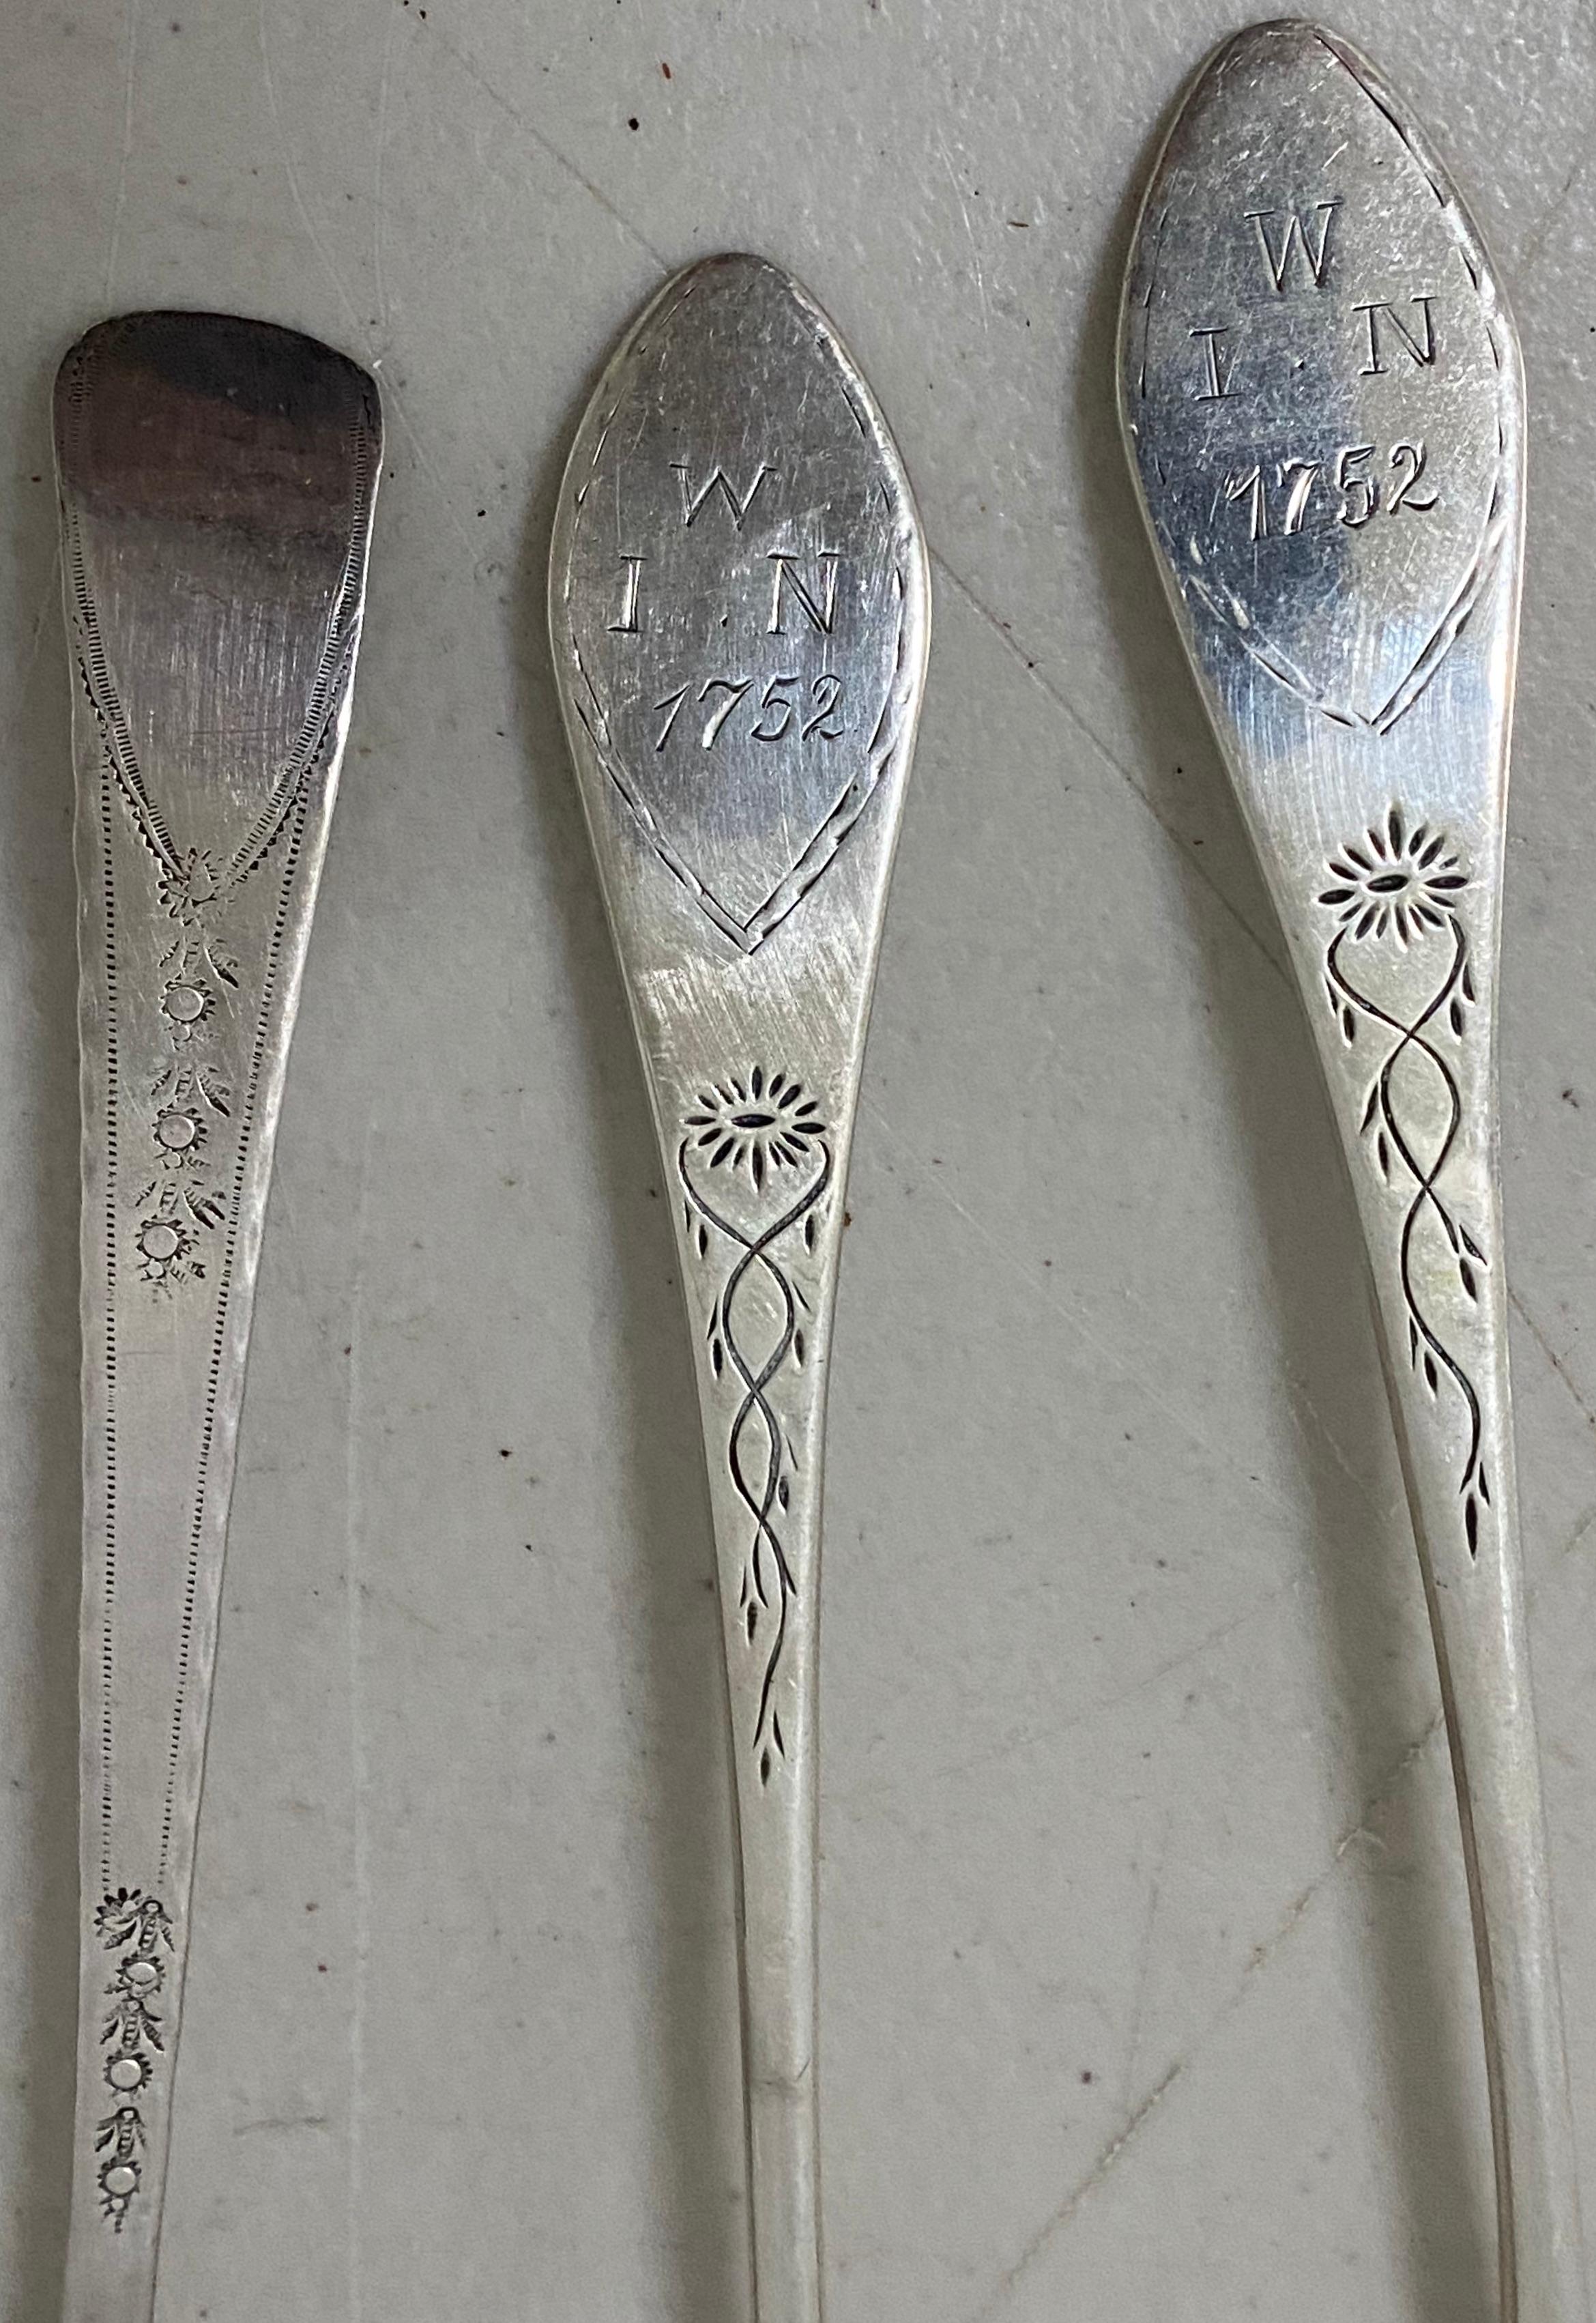 Three early American mid-18th century etched sterling spoons, circa 1752

Two spoons etched on the back with name

One spoon etched on the neck with floral pattern

Two spoons, dated 1752

Good antique condition.